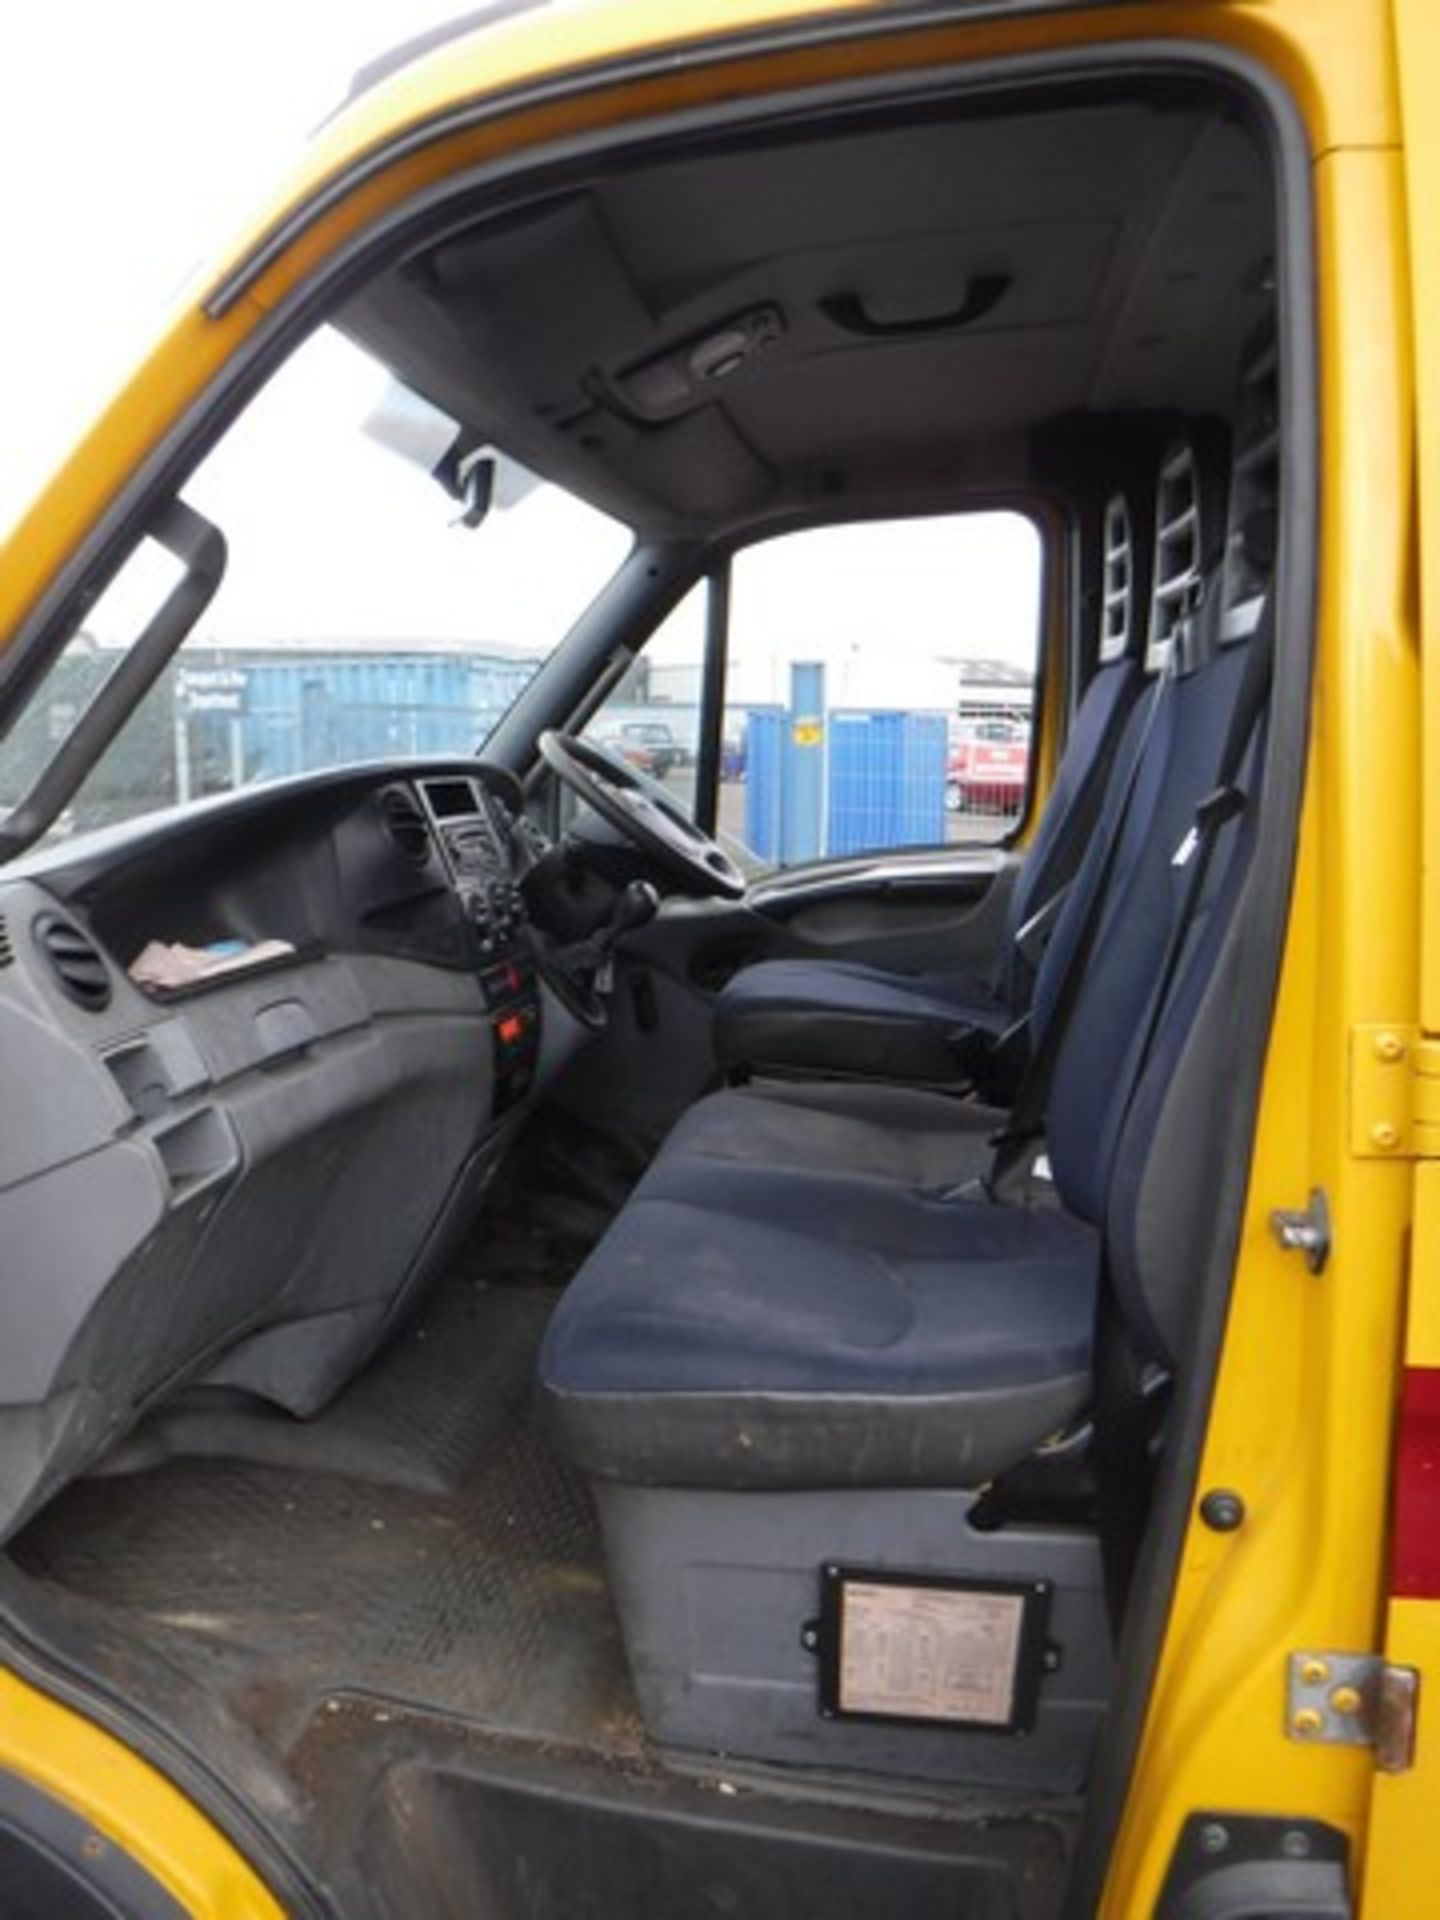 IVECO DAILY 65C18 - 2998cc - Image 7 of 11